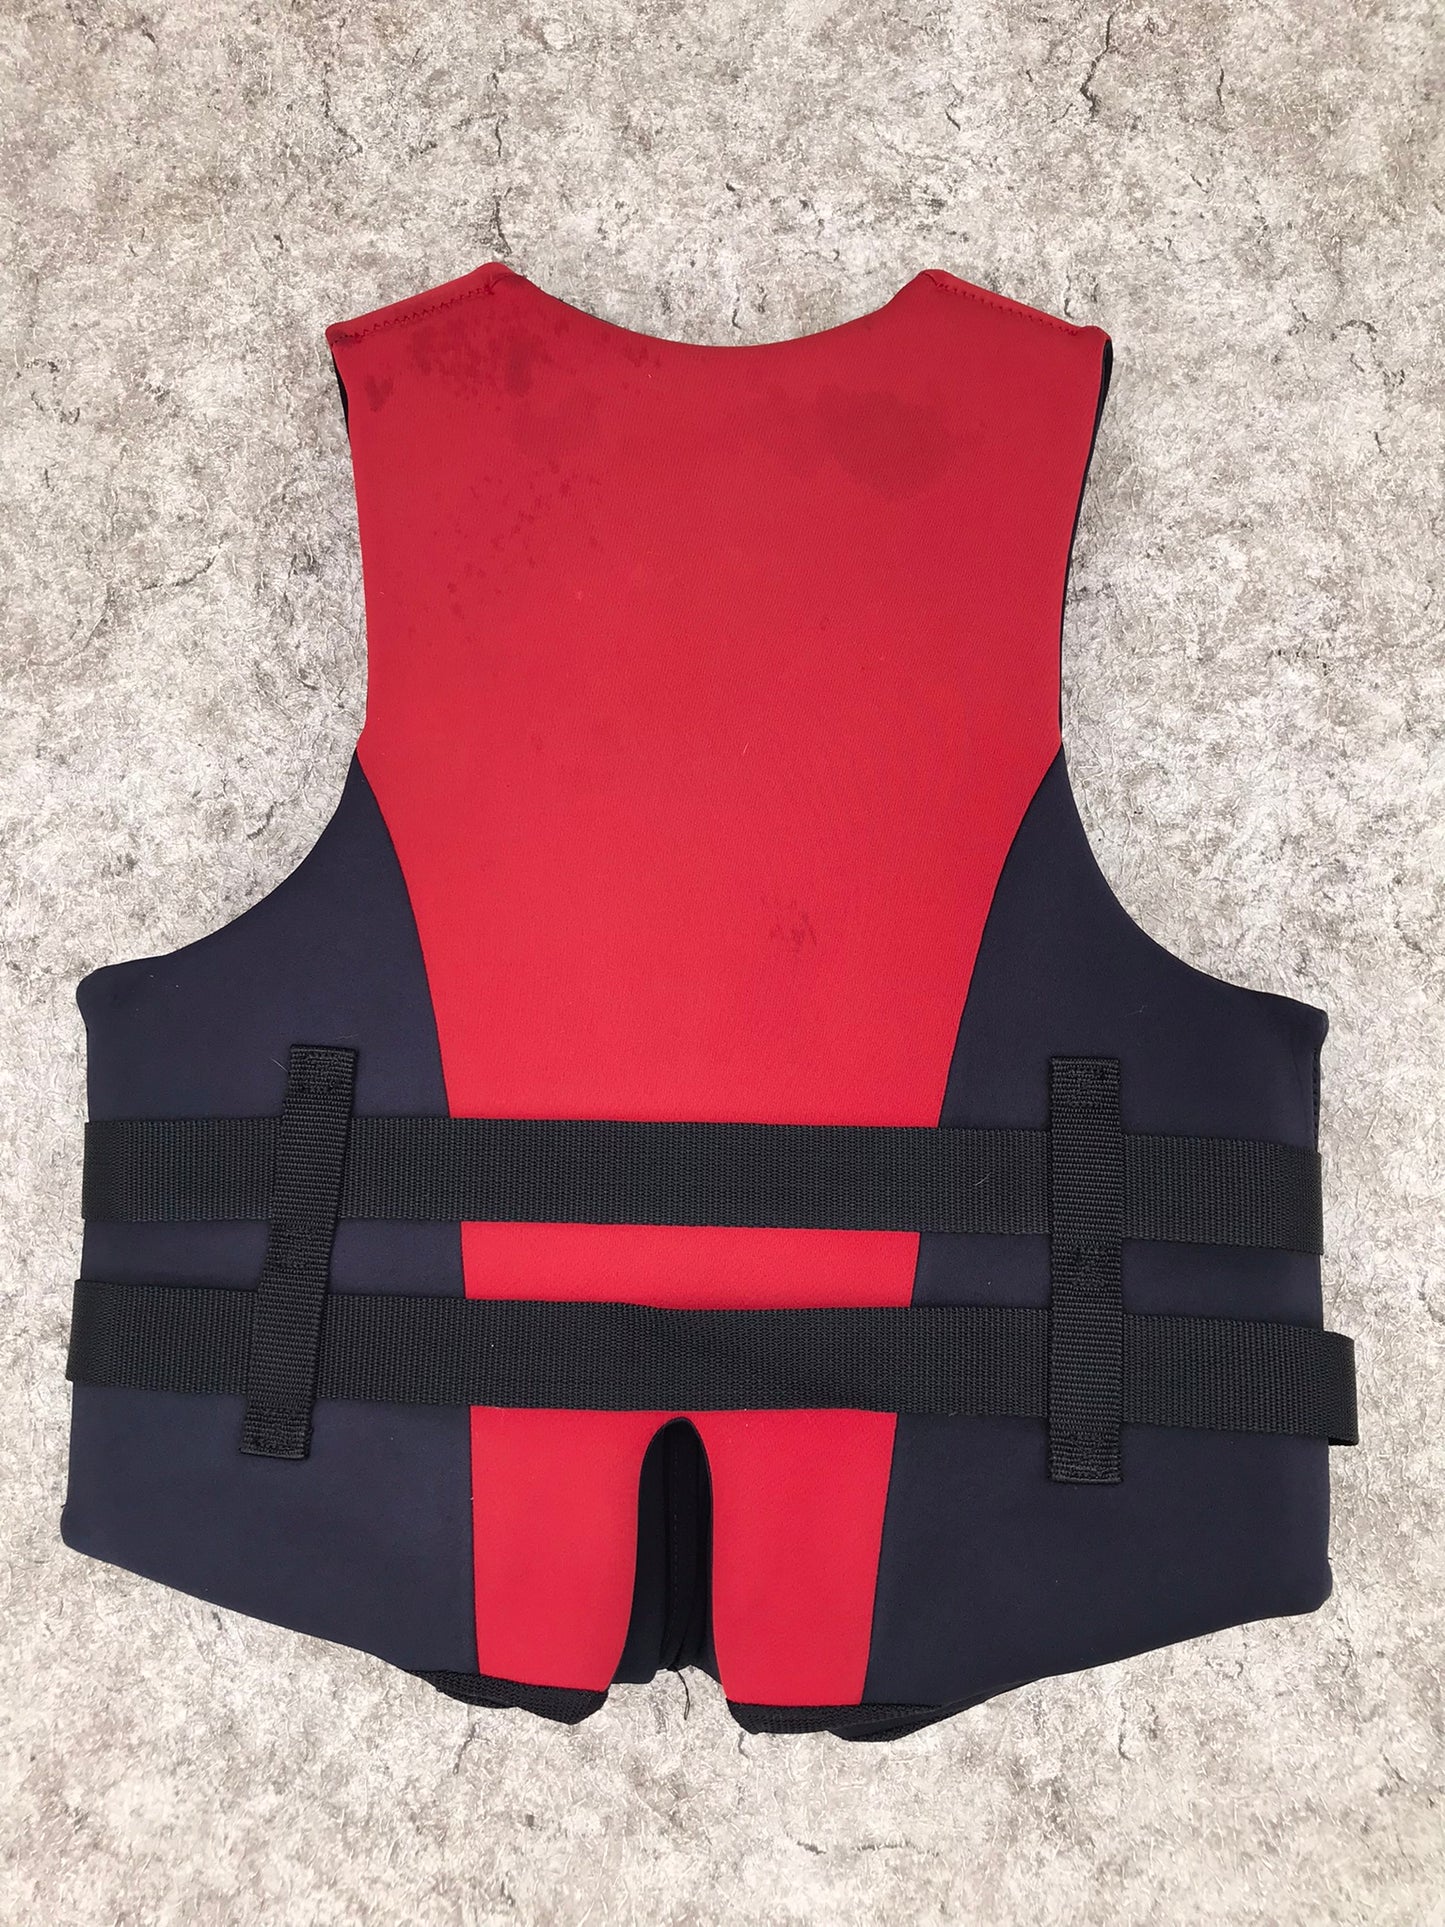 Life Jacket Adult Size Medium Coleman Neoprene Red Black With Whistle  Excellent